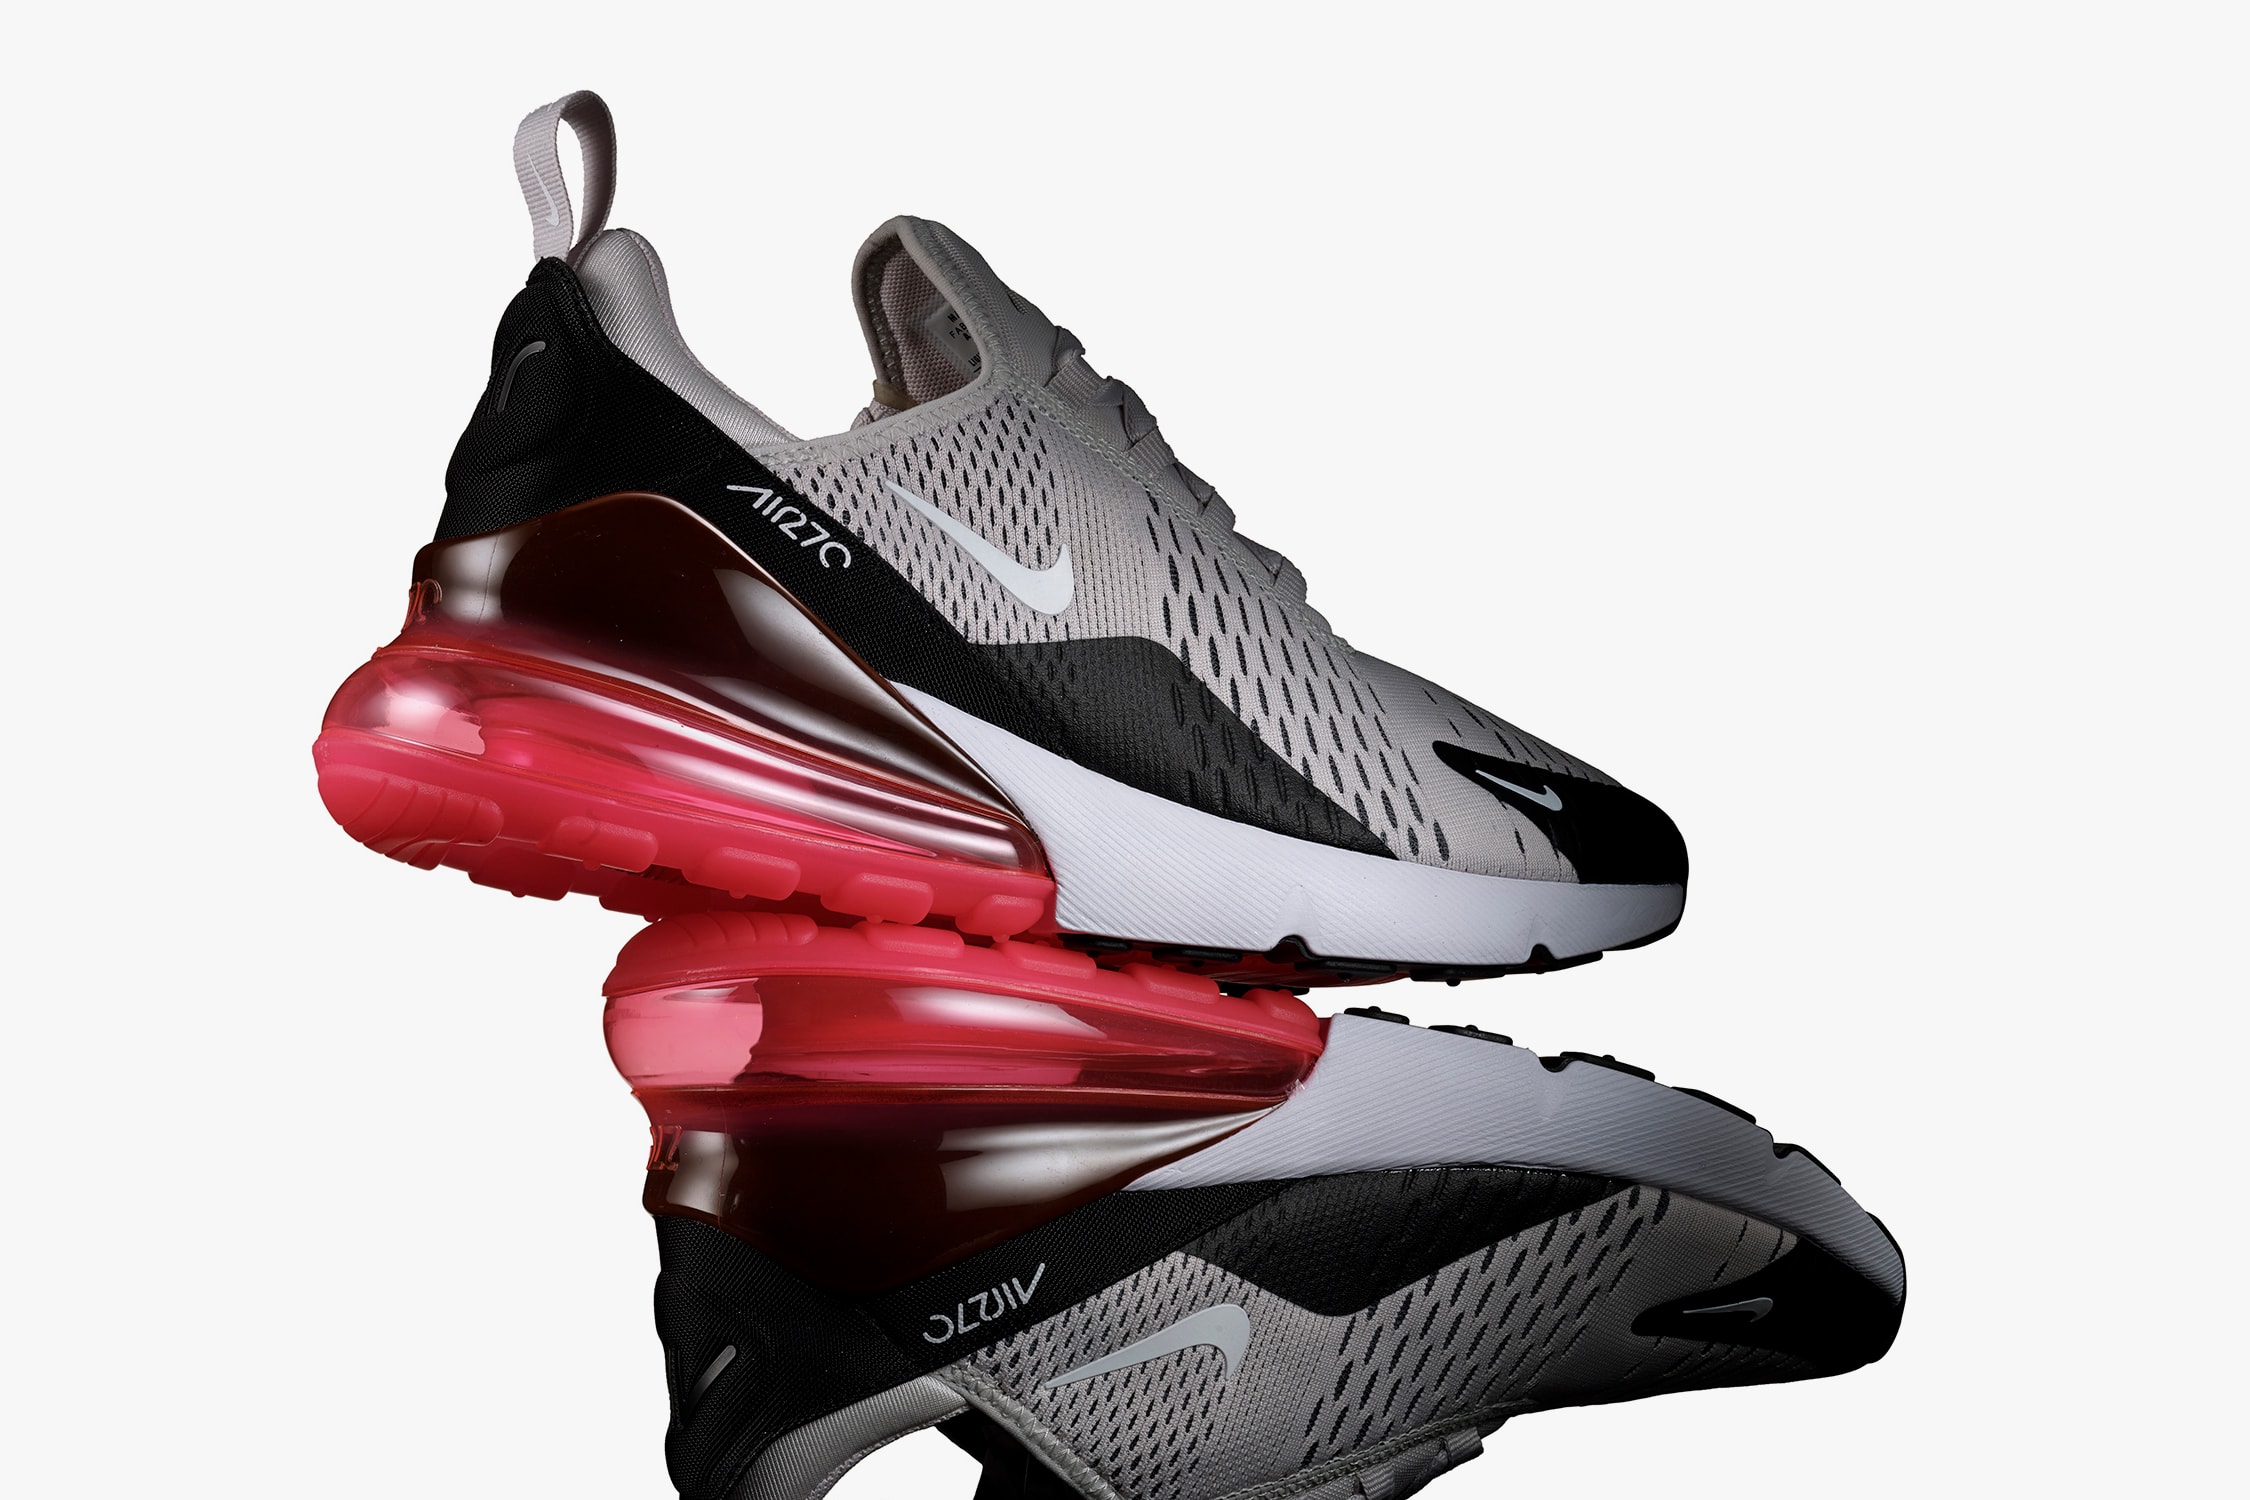 Nike Air Max 270 Silhouette Sneaker Shoe Innovation Technology Comfort Durability Debut Reveal Trainer Air Bubble Breathability